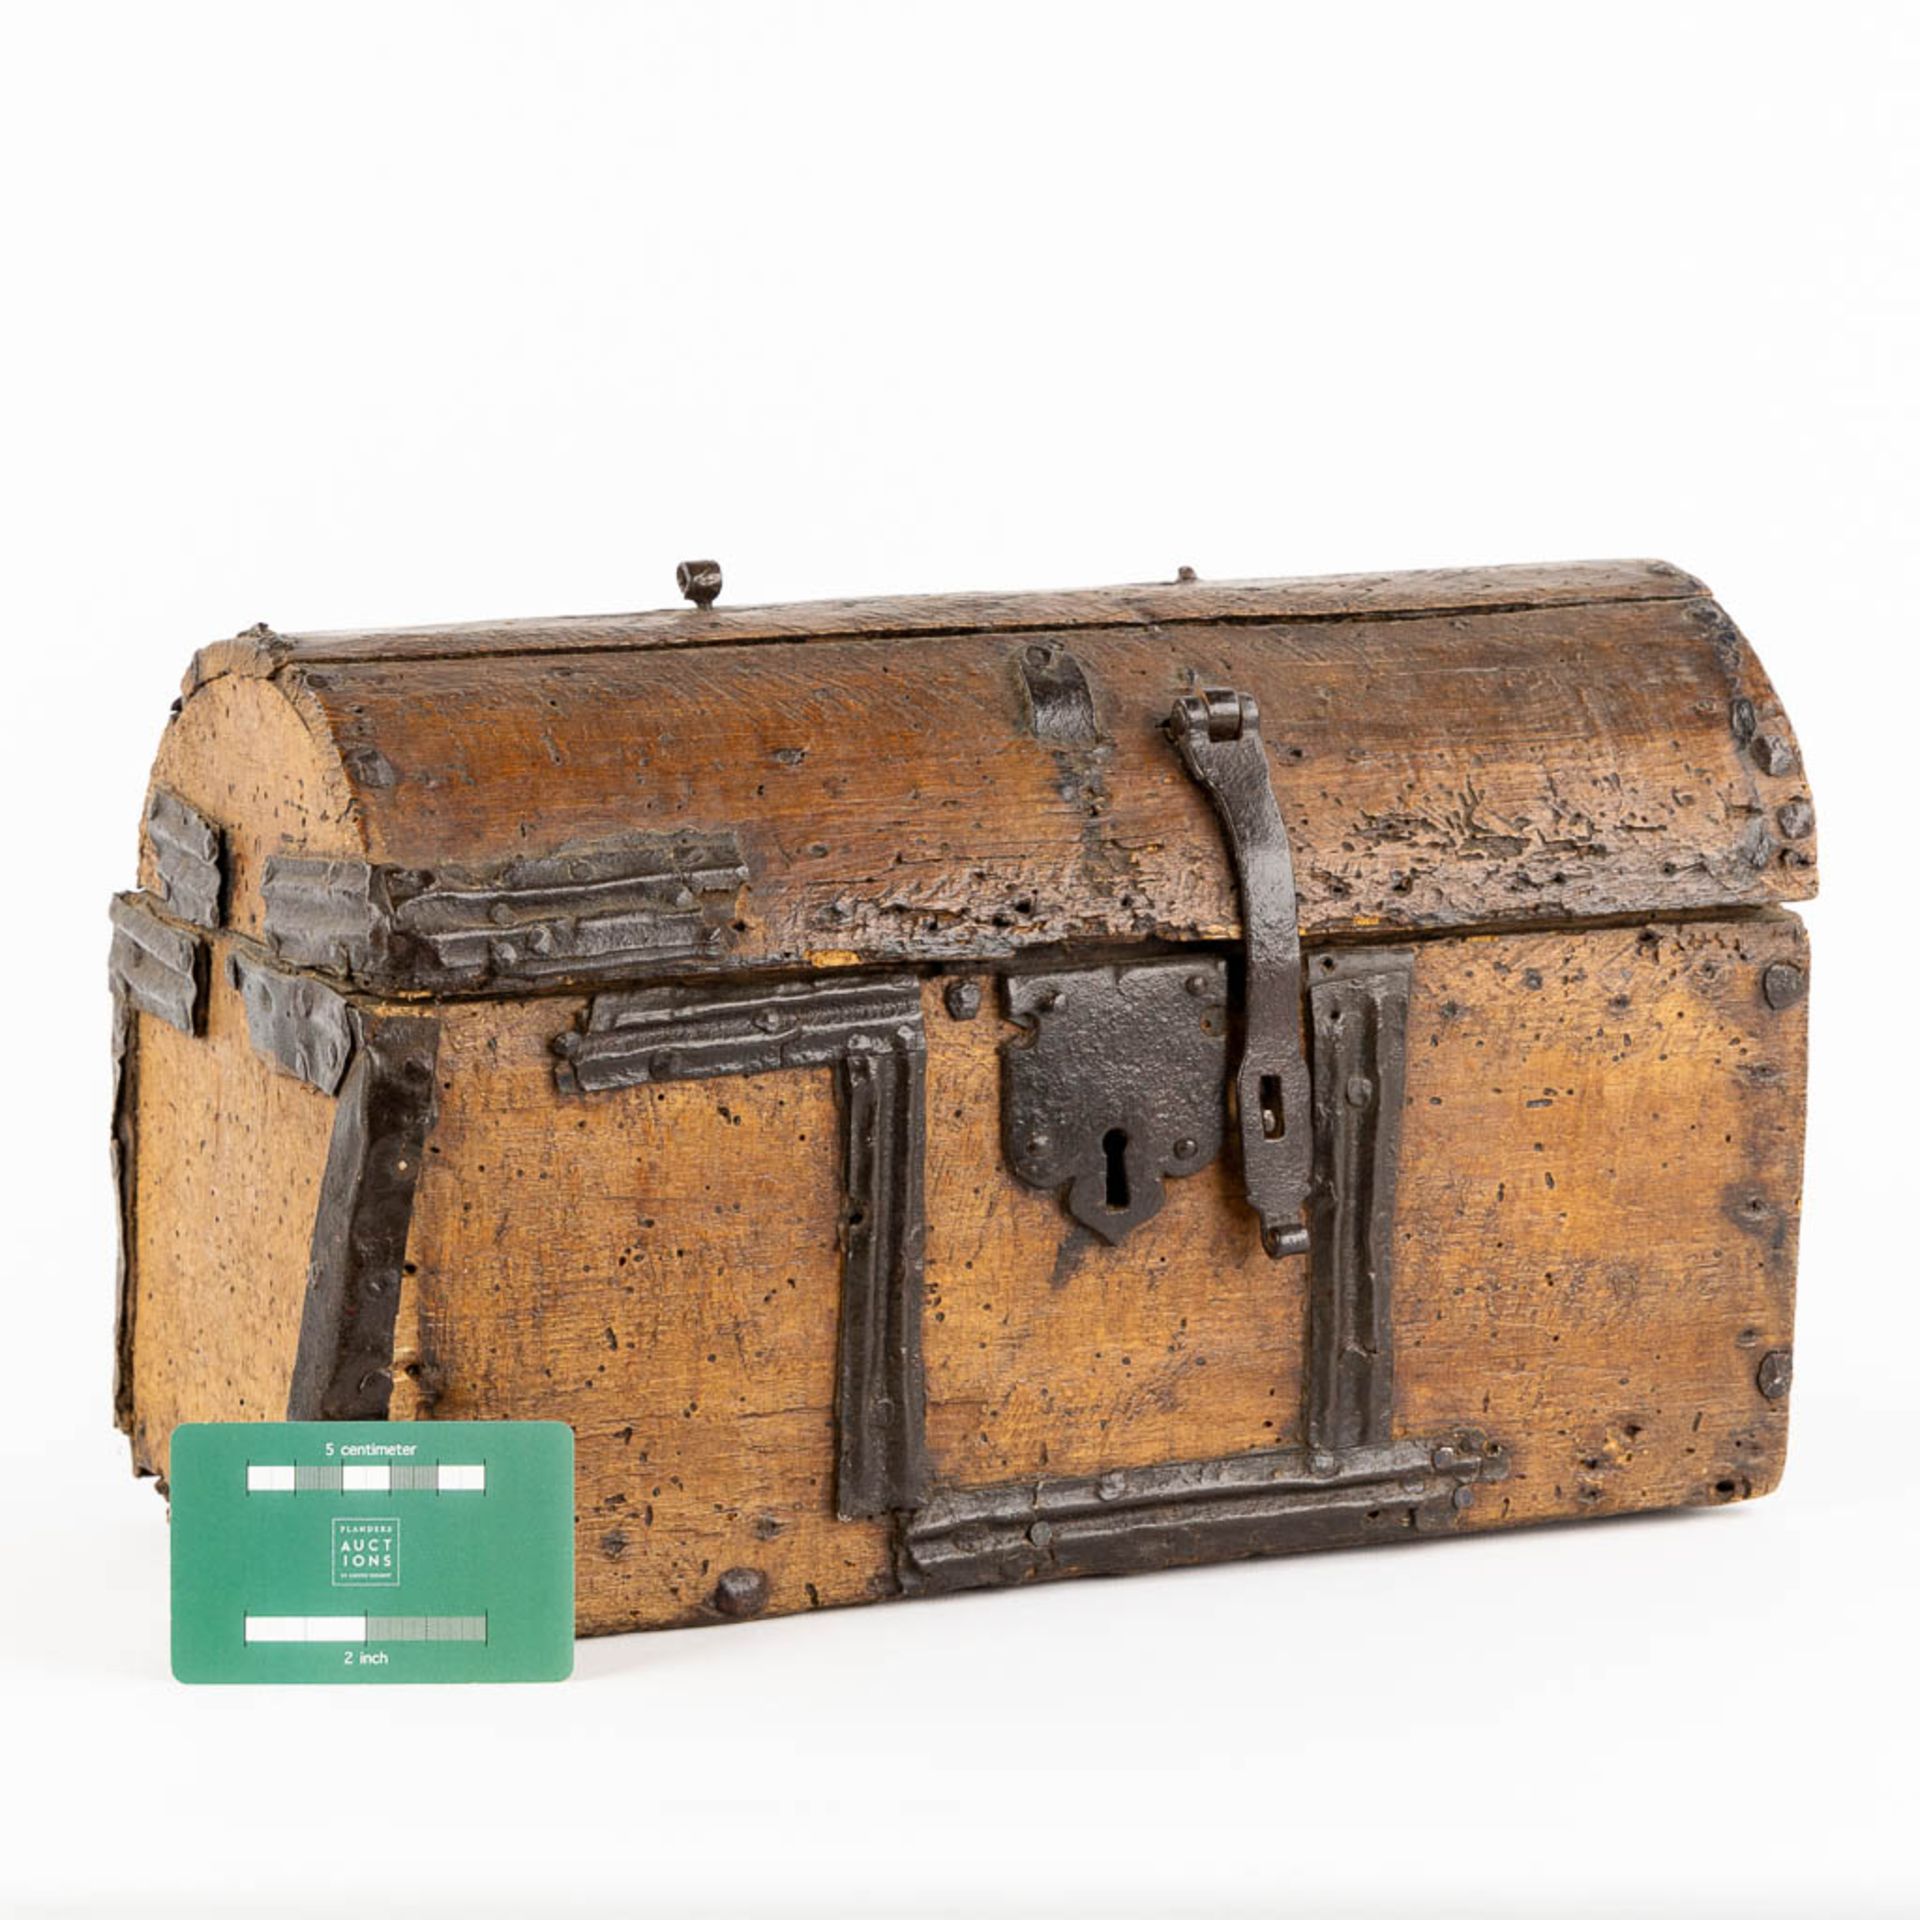 An antique money box or storage chest, wood and wrought iron, 16th/17th C. (L:20 x W:36 x H:22 cm) - Image 2 of 14